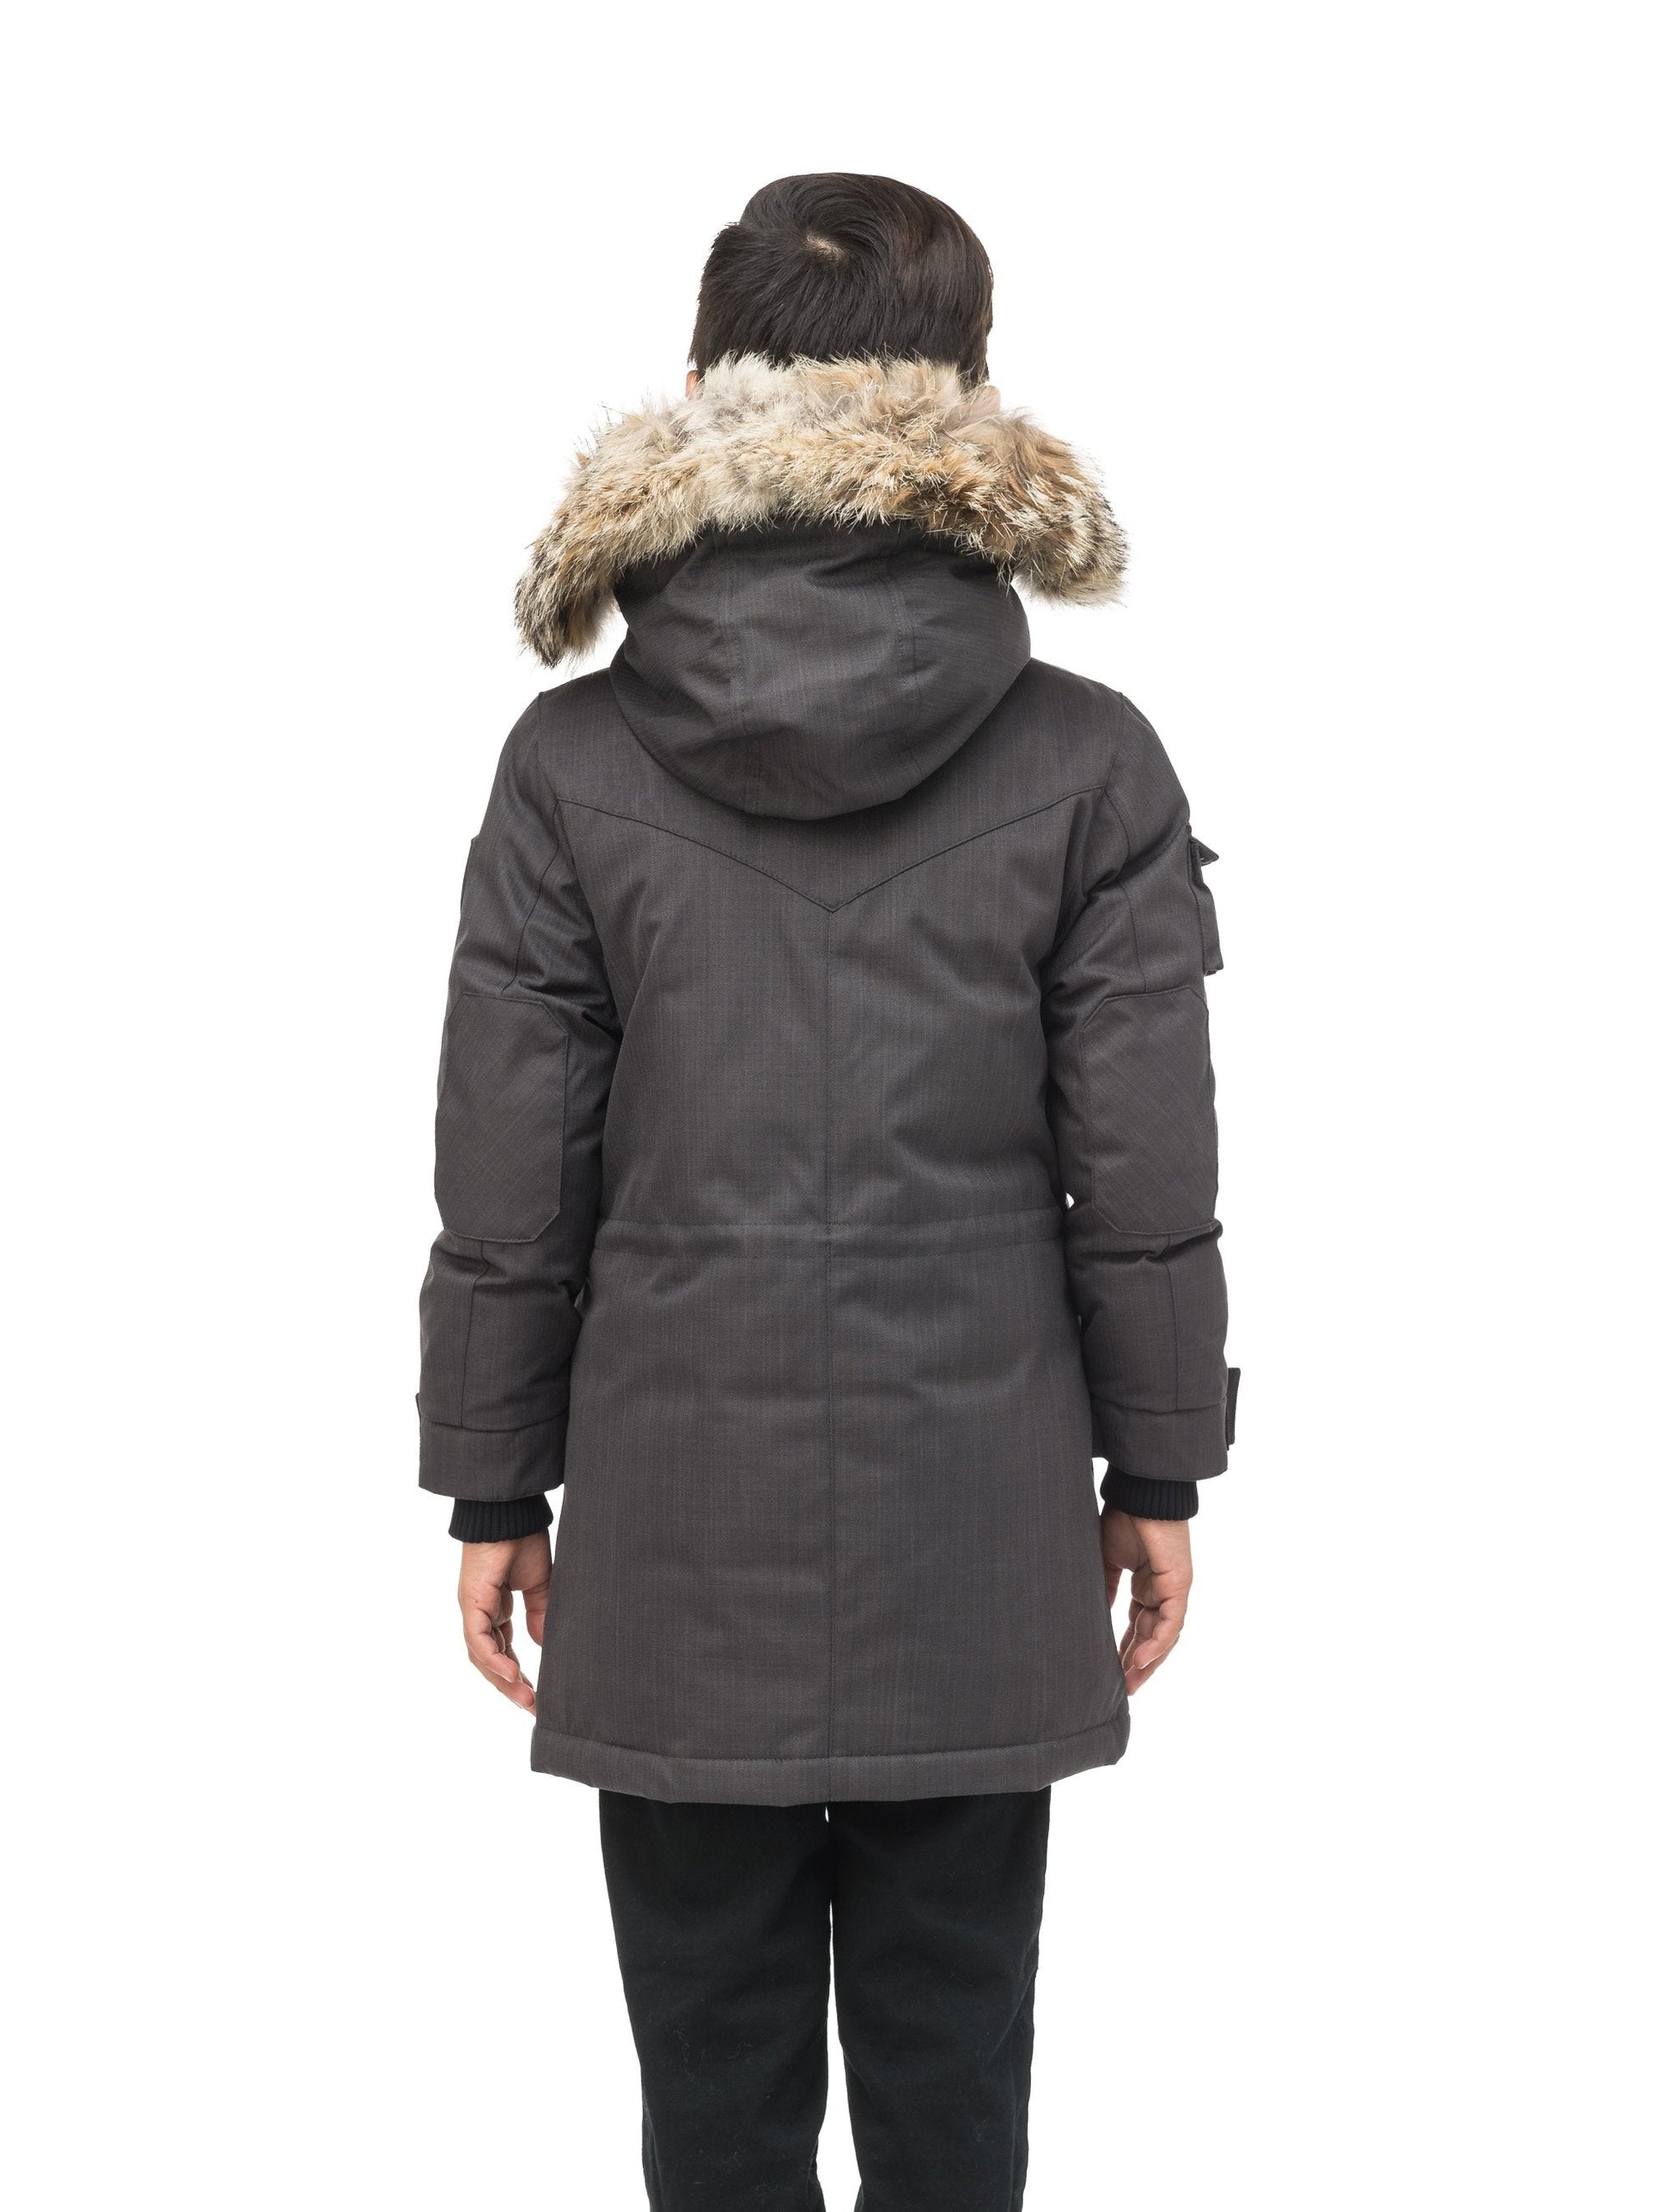 Kid's knee length parka with magnetized closure in CH Steel Grey